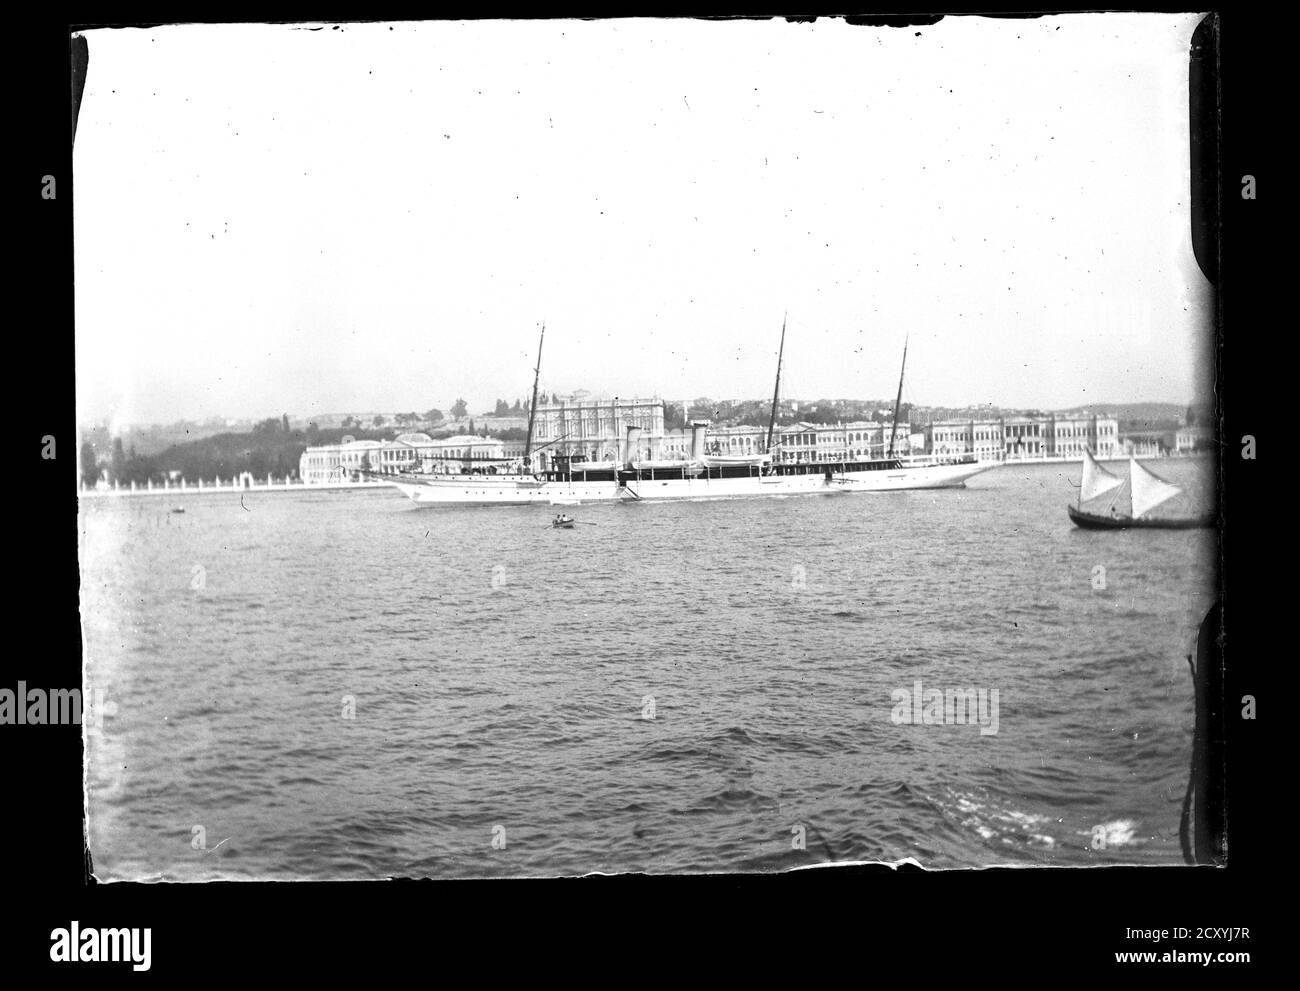 Turkey Istanbul Golden Horn Ottoman Imperial yacht Ertuğrul passing Dolmabahçe Palace. The Imperial Ottoman Government used many yachts for its head of state. Others were: Tesrifiye, İzzeddin, Sultaniye and Talia. Photograph on dry glass plate from the Herry W. Schaefer collection, around 1910. Stock Photo